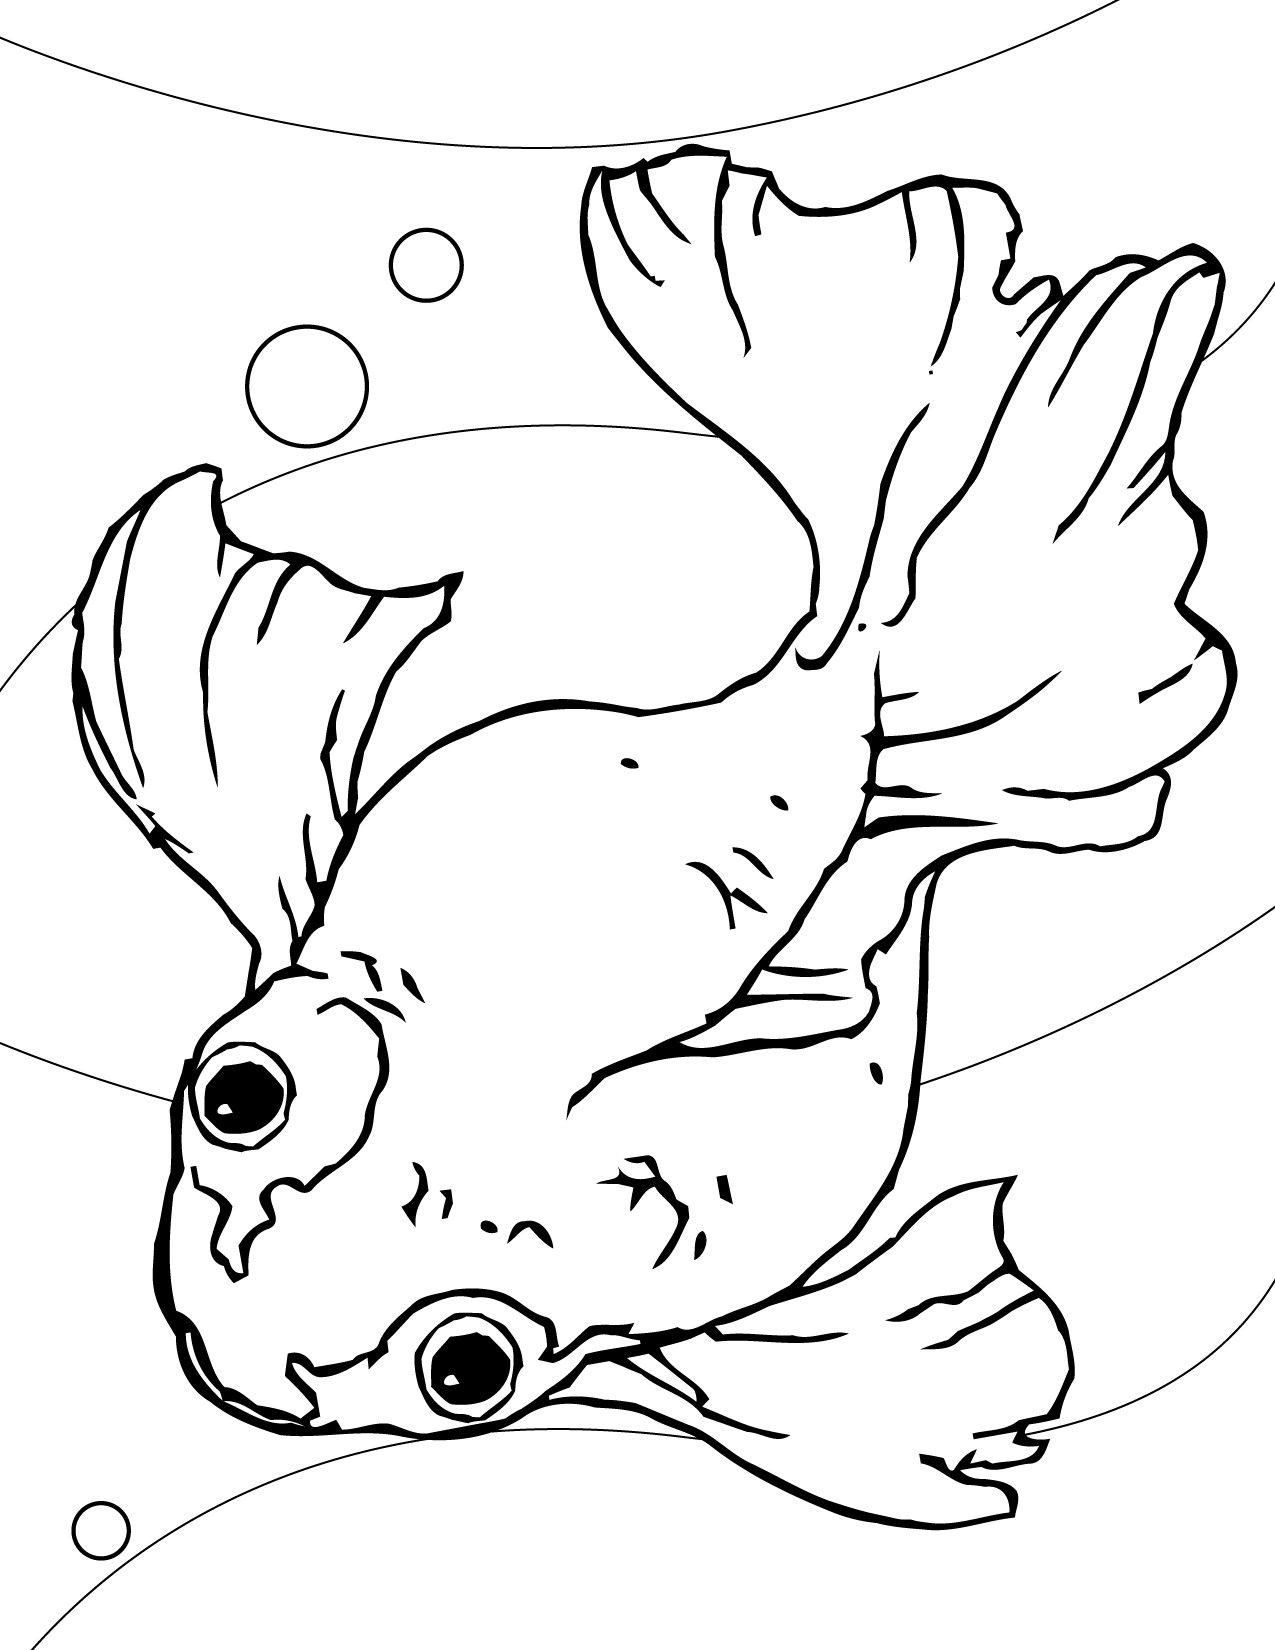 Coloring Pages Of Fish
 Free Printable Goldfish Coloring Pages For Kids